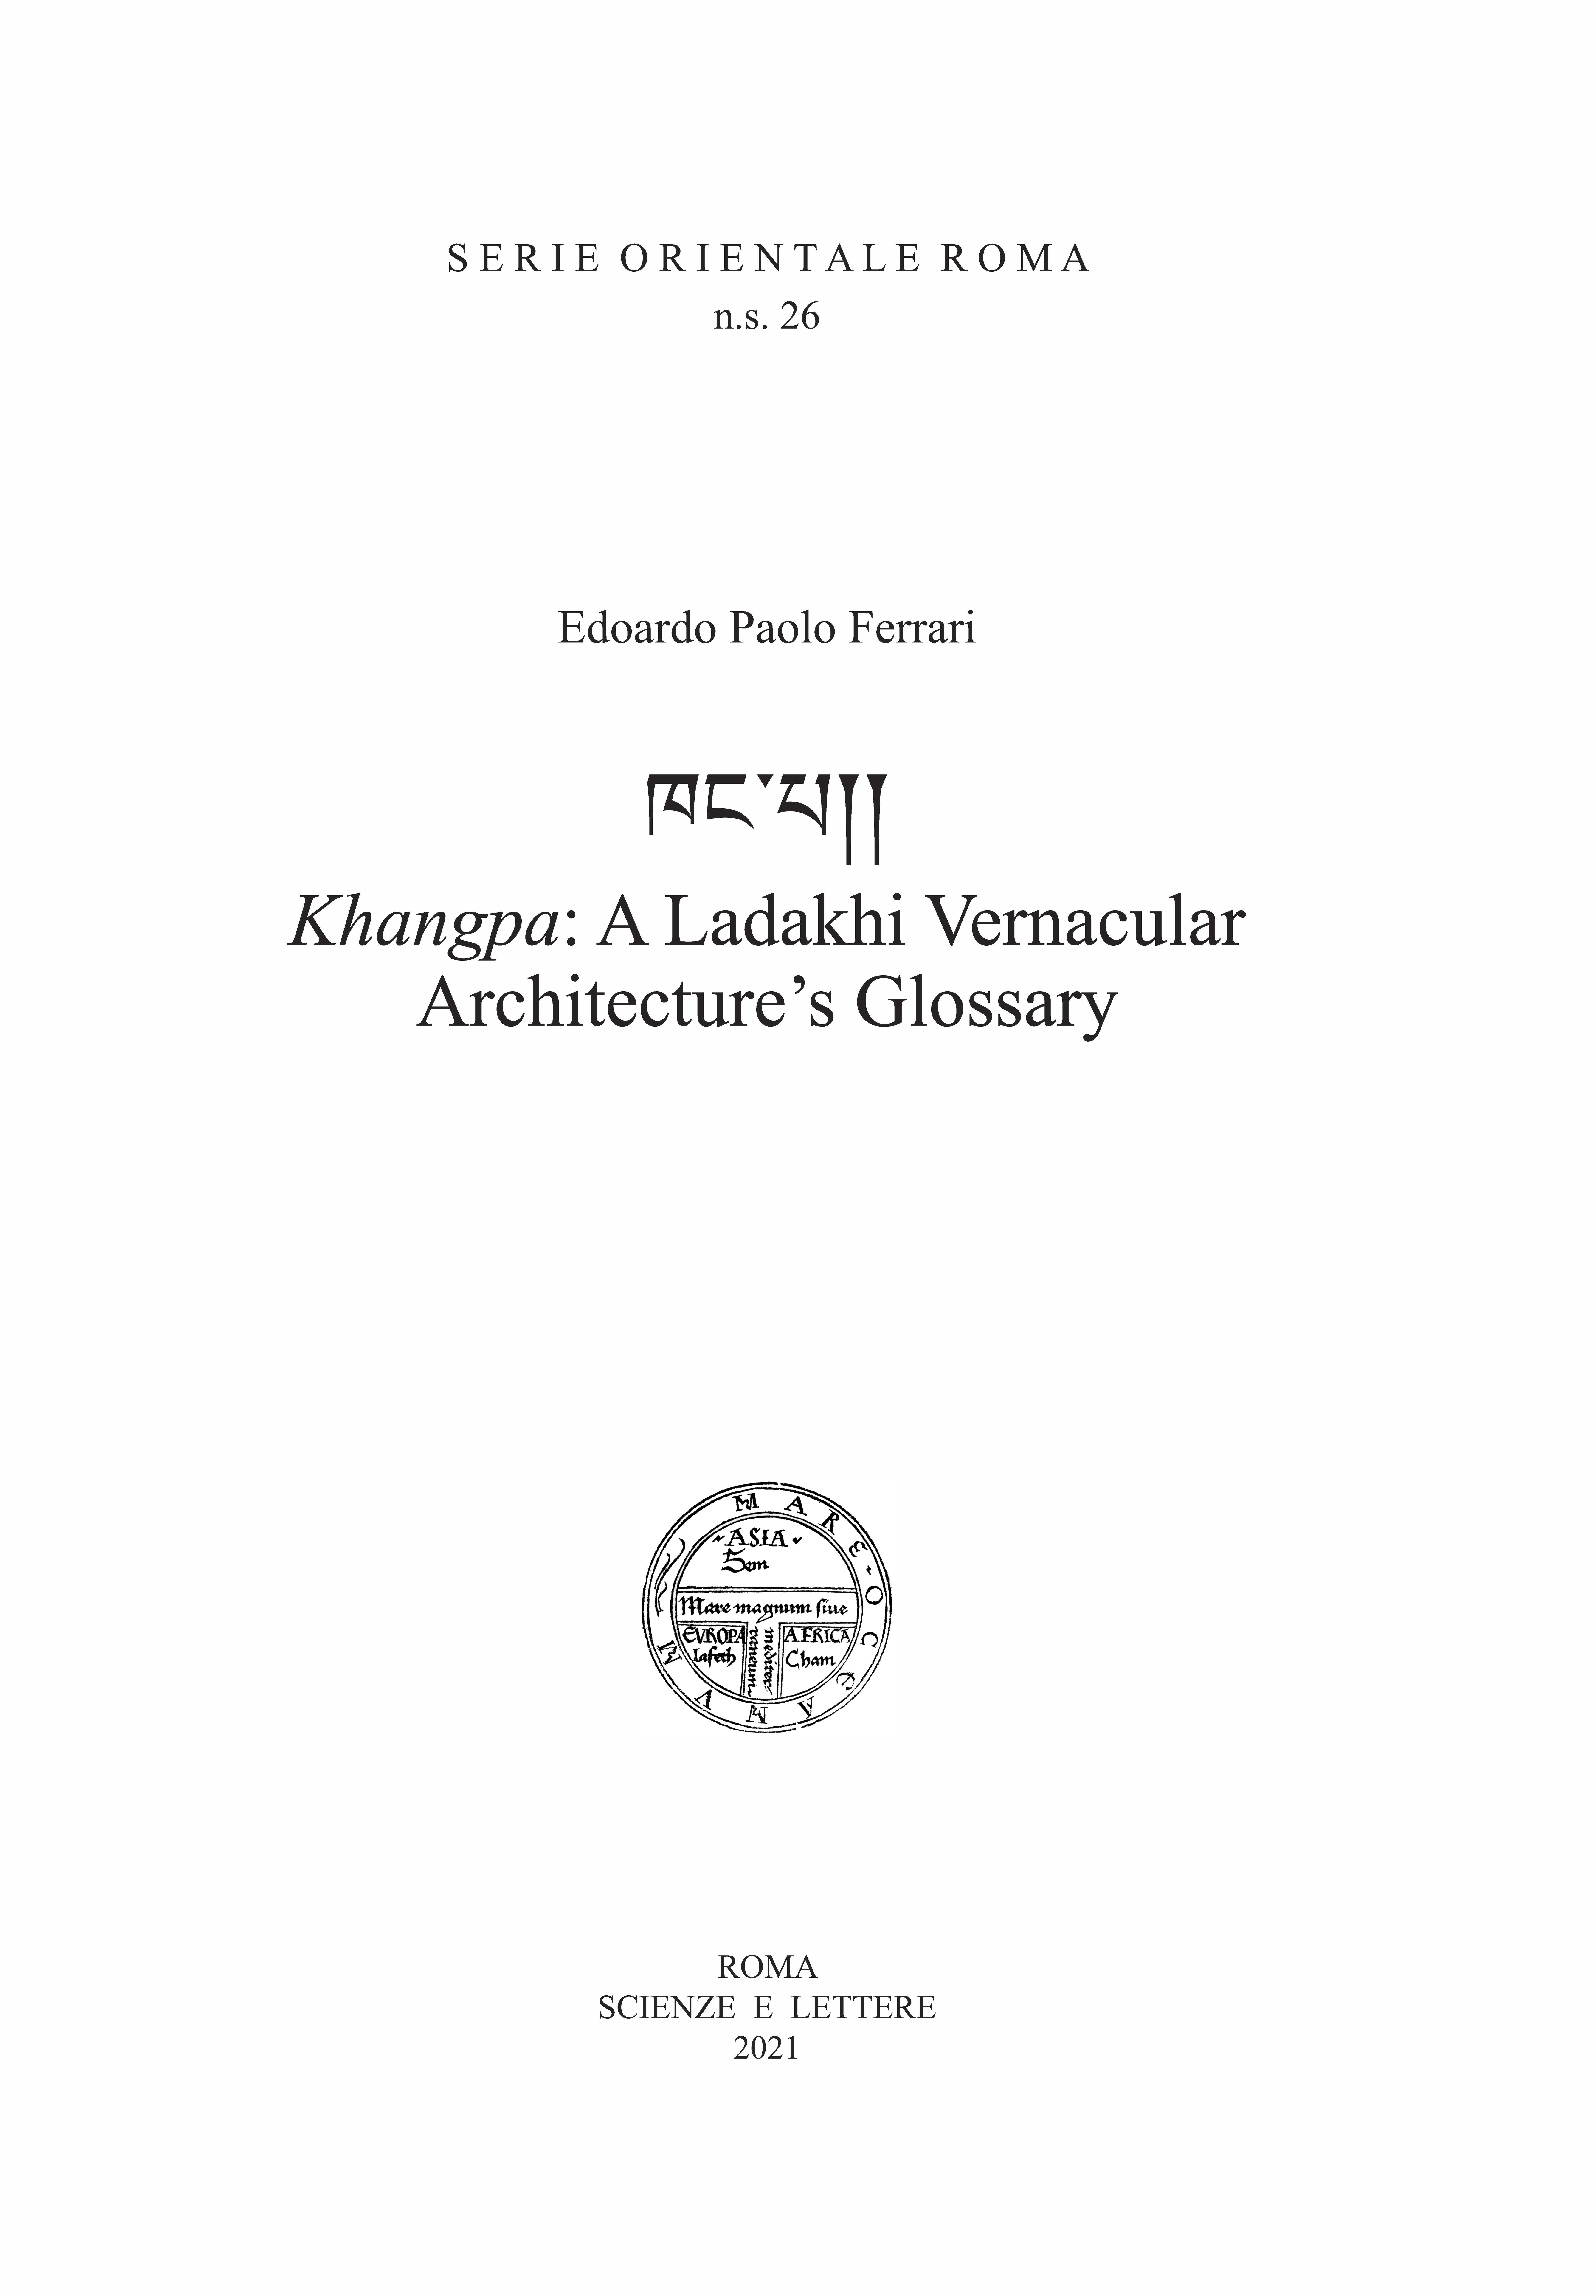 Khang pa: A Ladakhi Vernacular Architecture Glossary - SERIE ORIENTALE ROMA n.s. 26